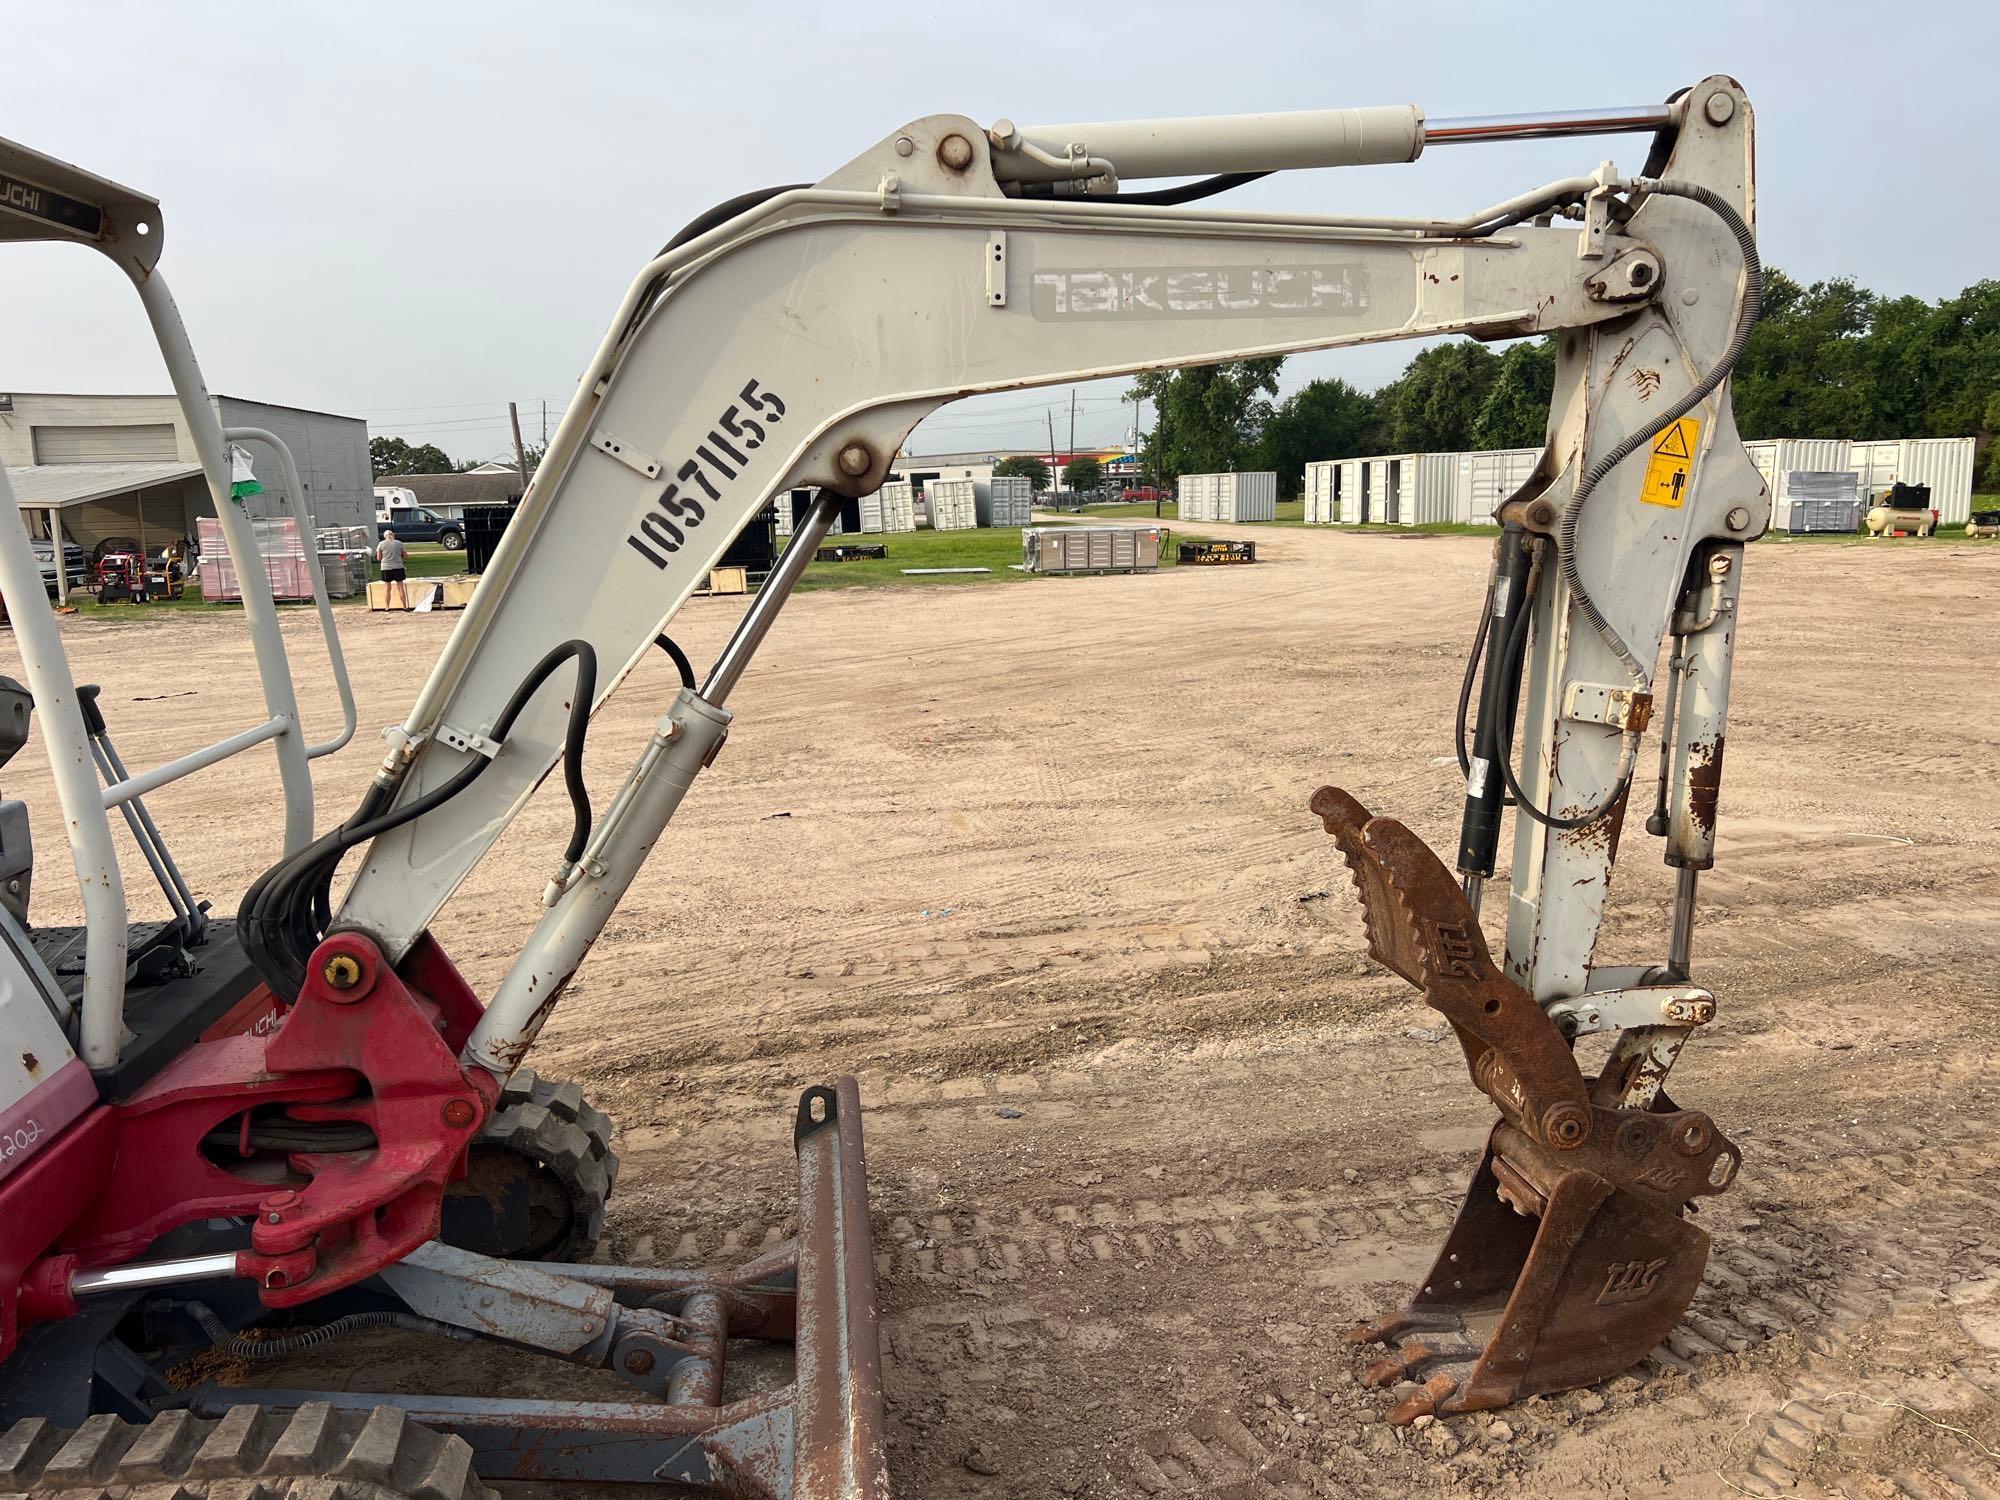 2017 TAKEUCHI TB240 HYDRAULIC EXCAVATOR SN:124002202 powered by diesel engine, equipped with OROPS,